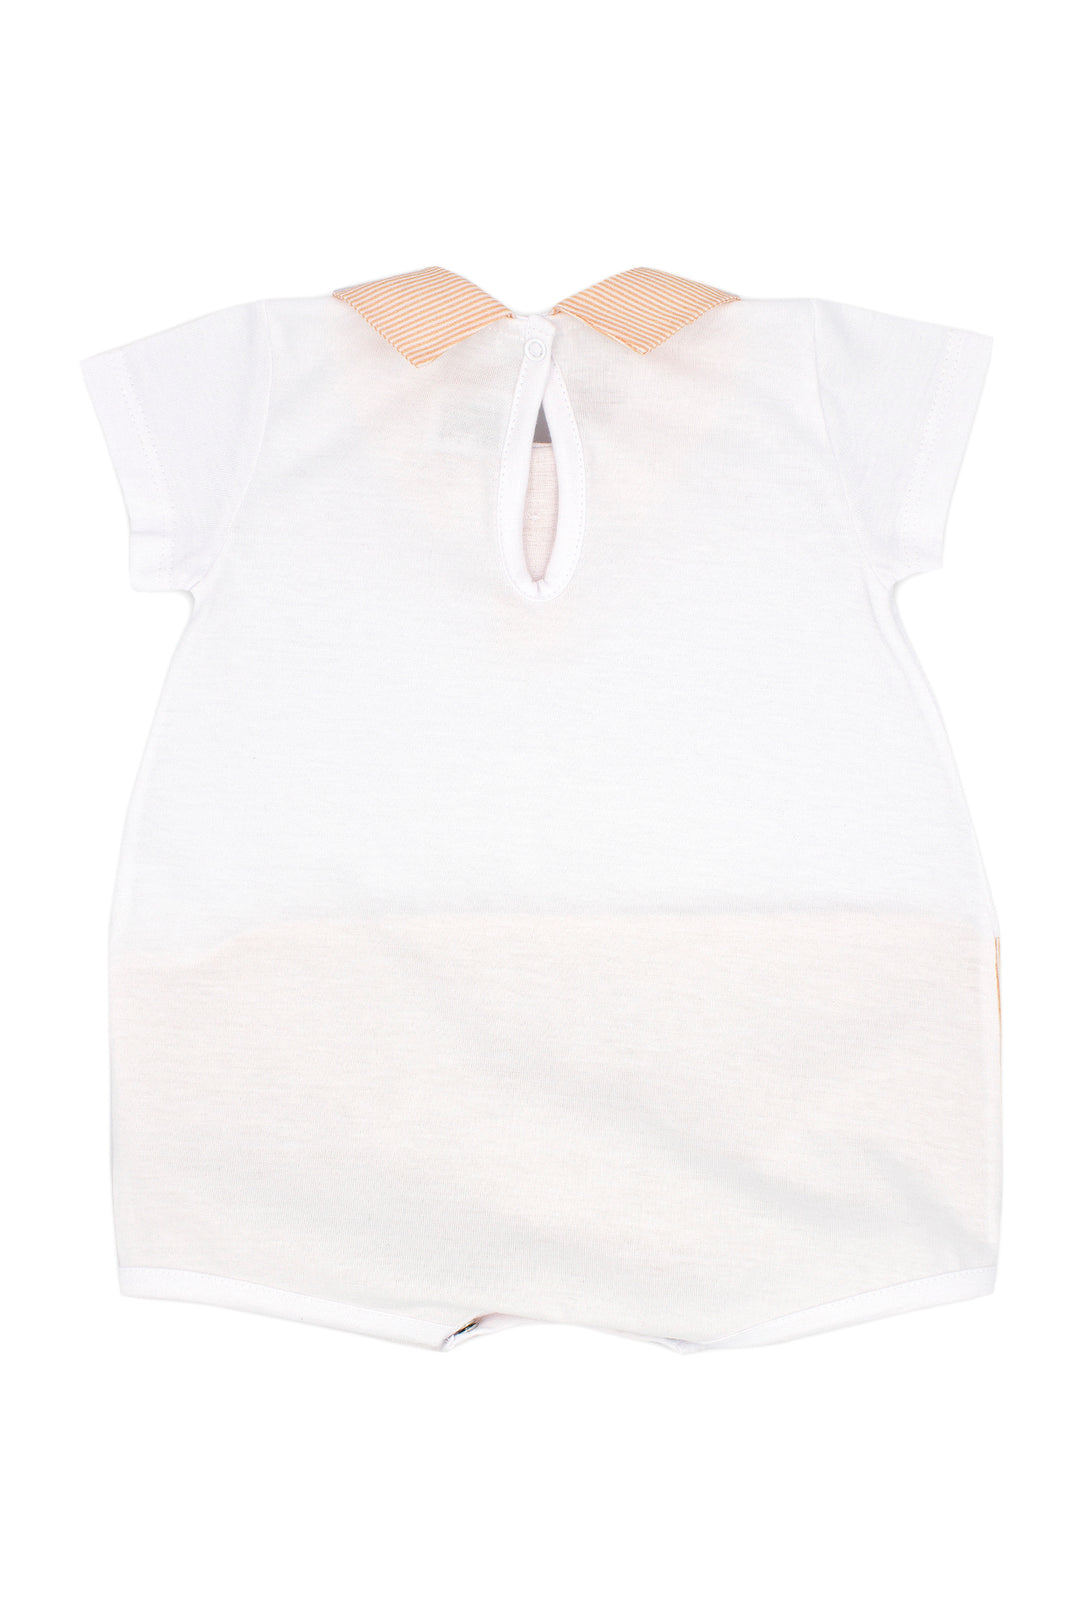 Rapife "Holden" Apricot Striped Romper | Millie and John